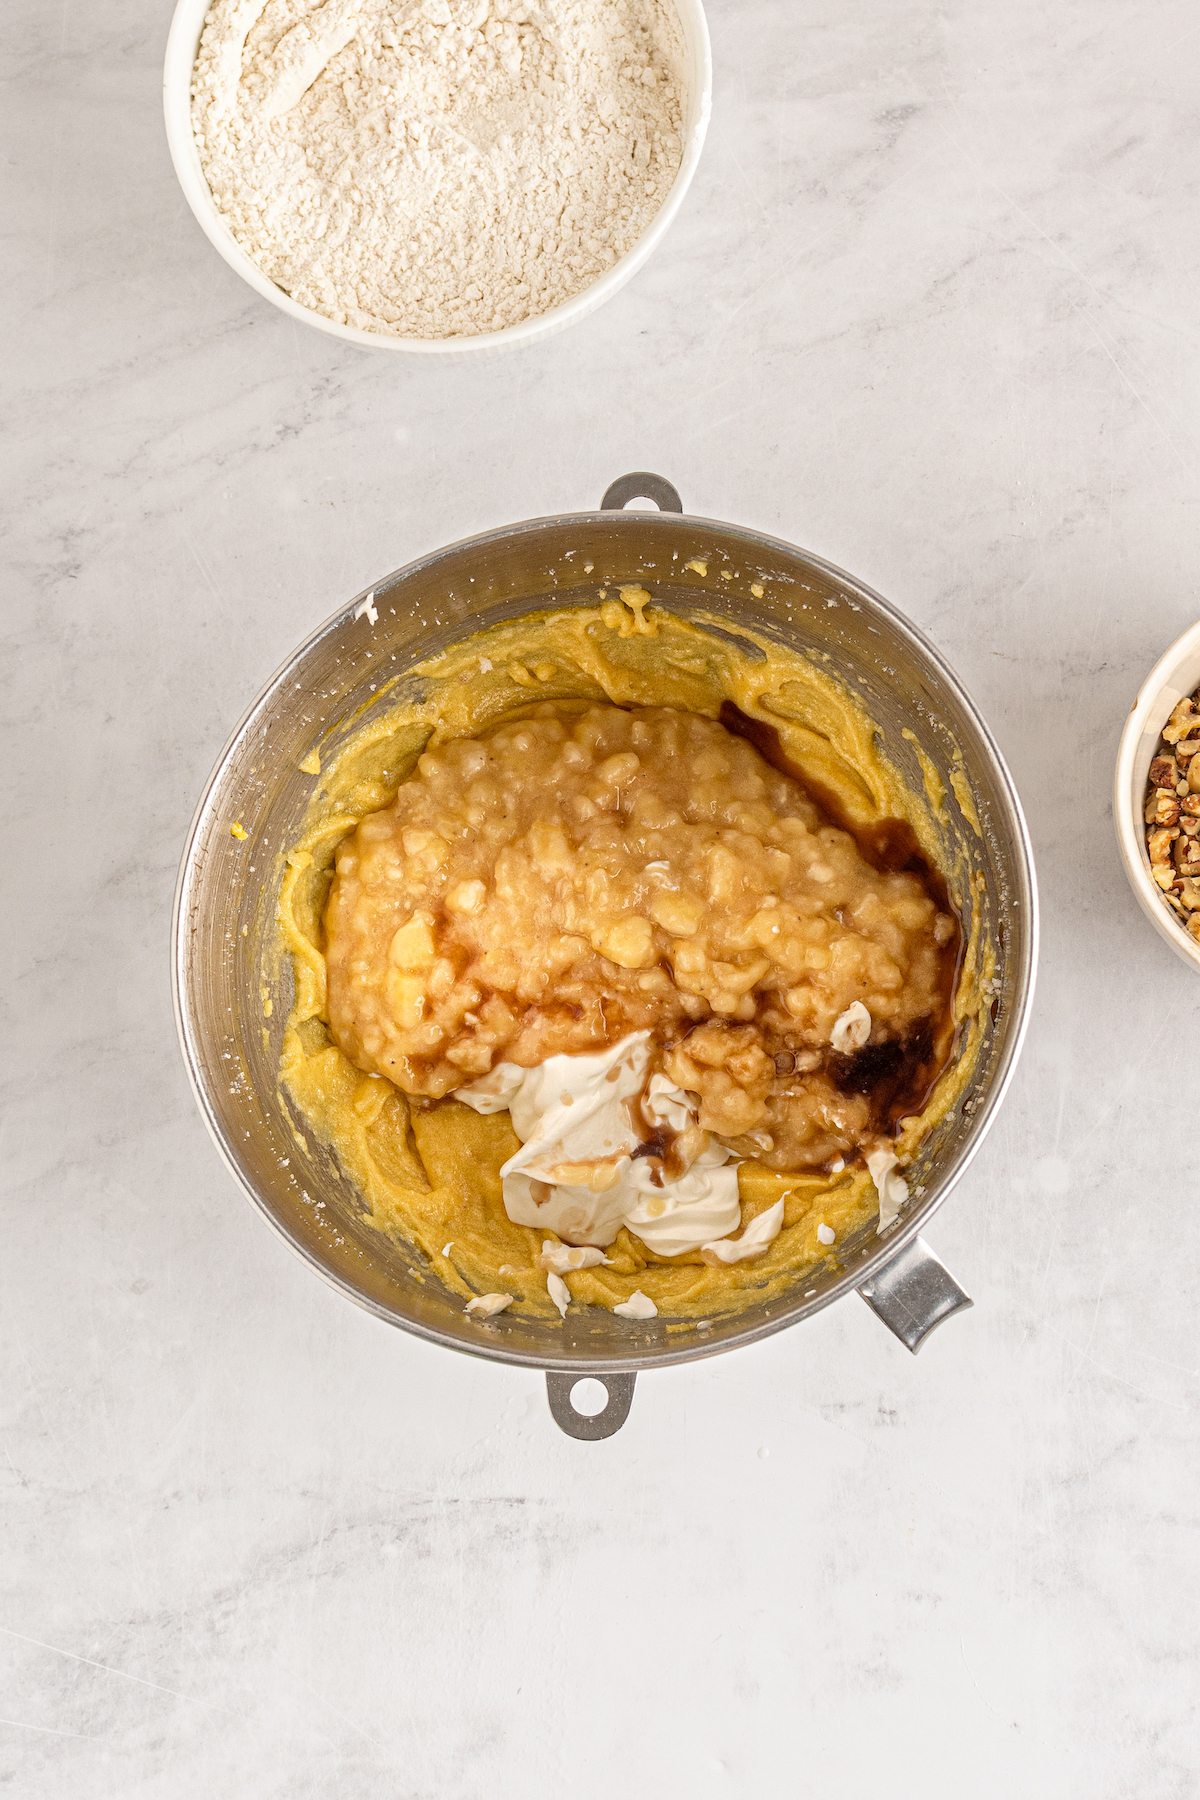 Mashed bananas, sour cream, and other ingredients in a mixing bowl.